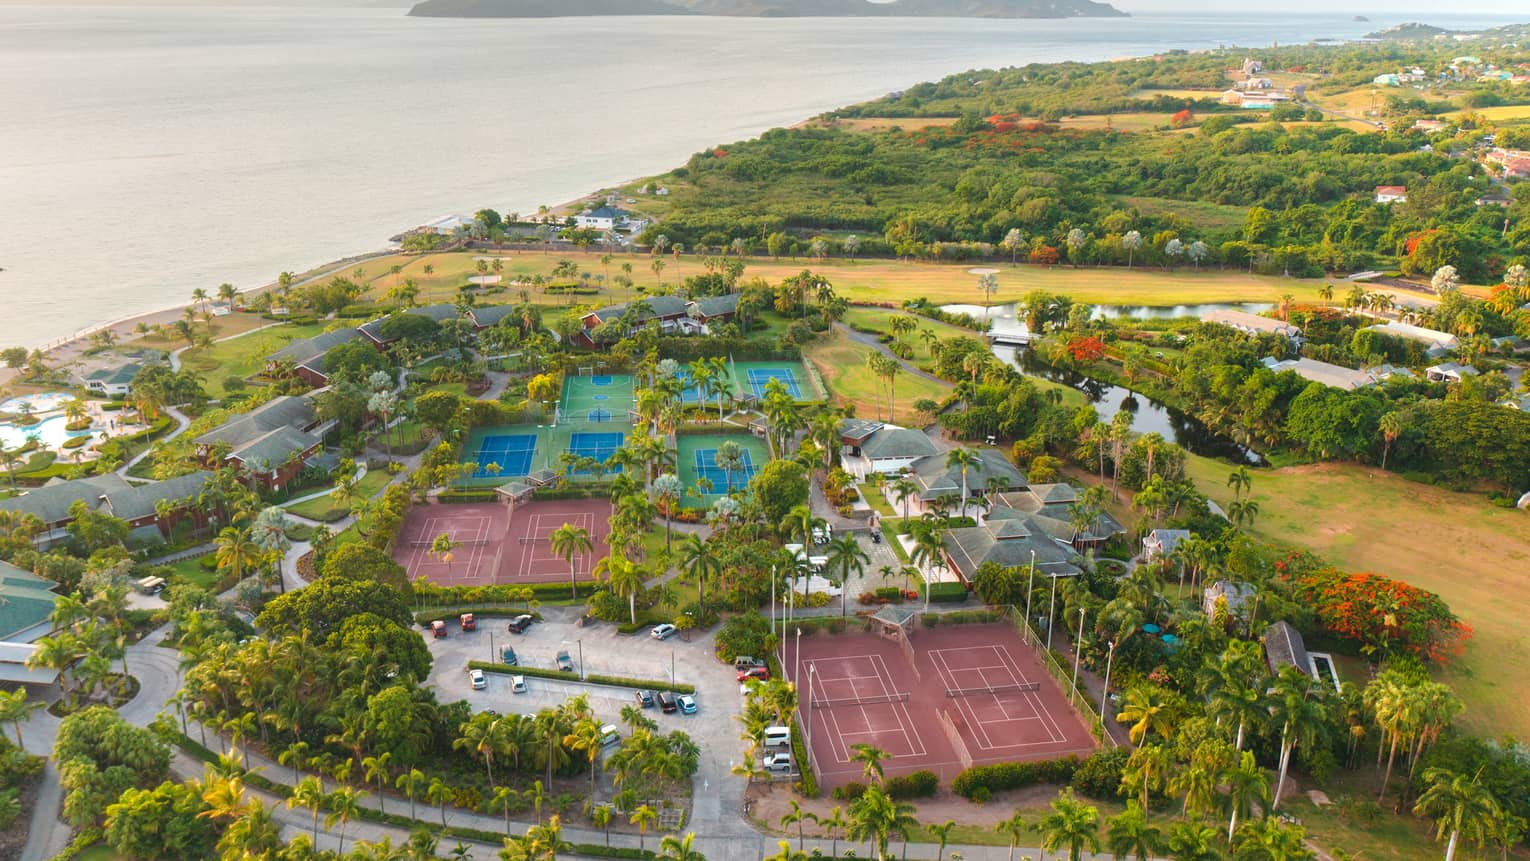 A aerial view of tennis, pickleball courts and many palm trees near a beach.